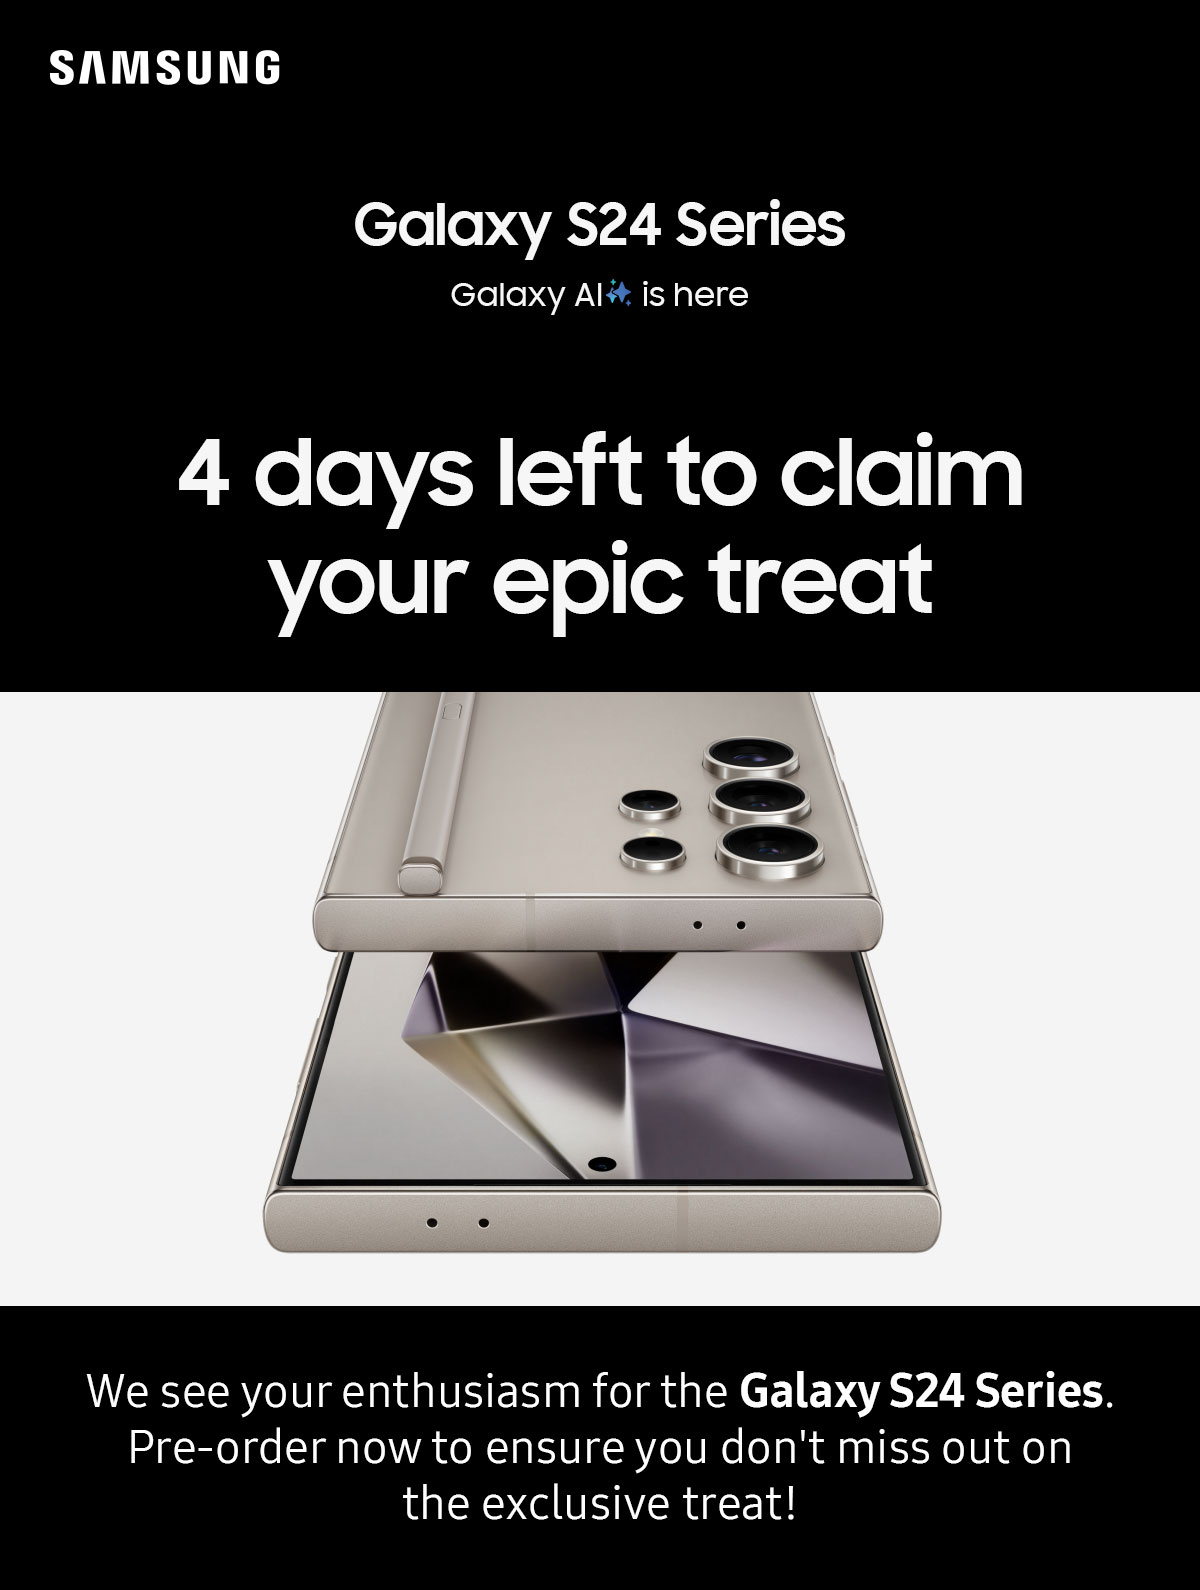 4 days left to claim your epic treat | We see your enthusiasm for the Galaxy S24 Series. Pre-order now to ensure you don't miss out on the exclusive treat!